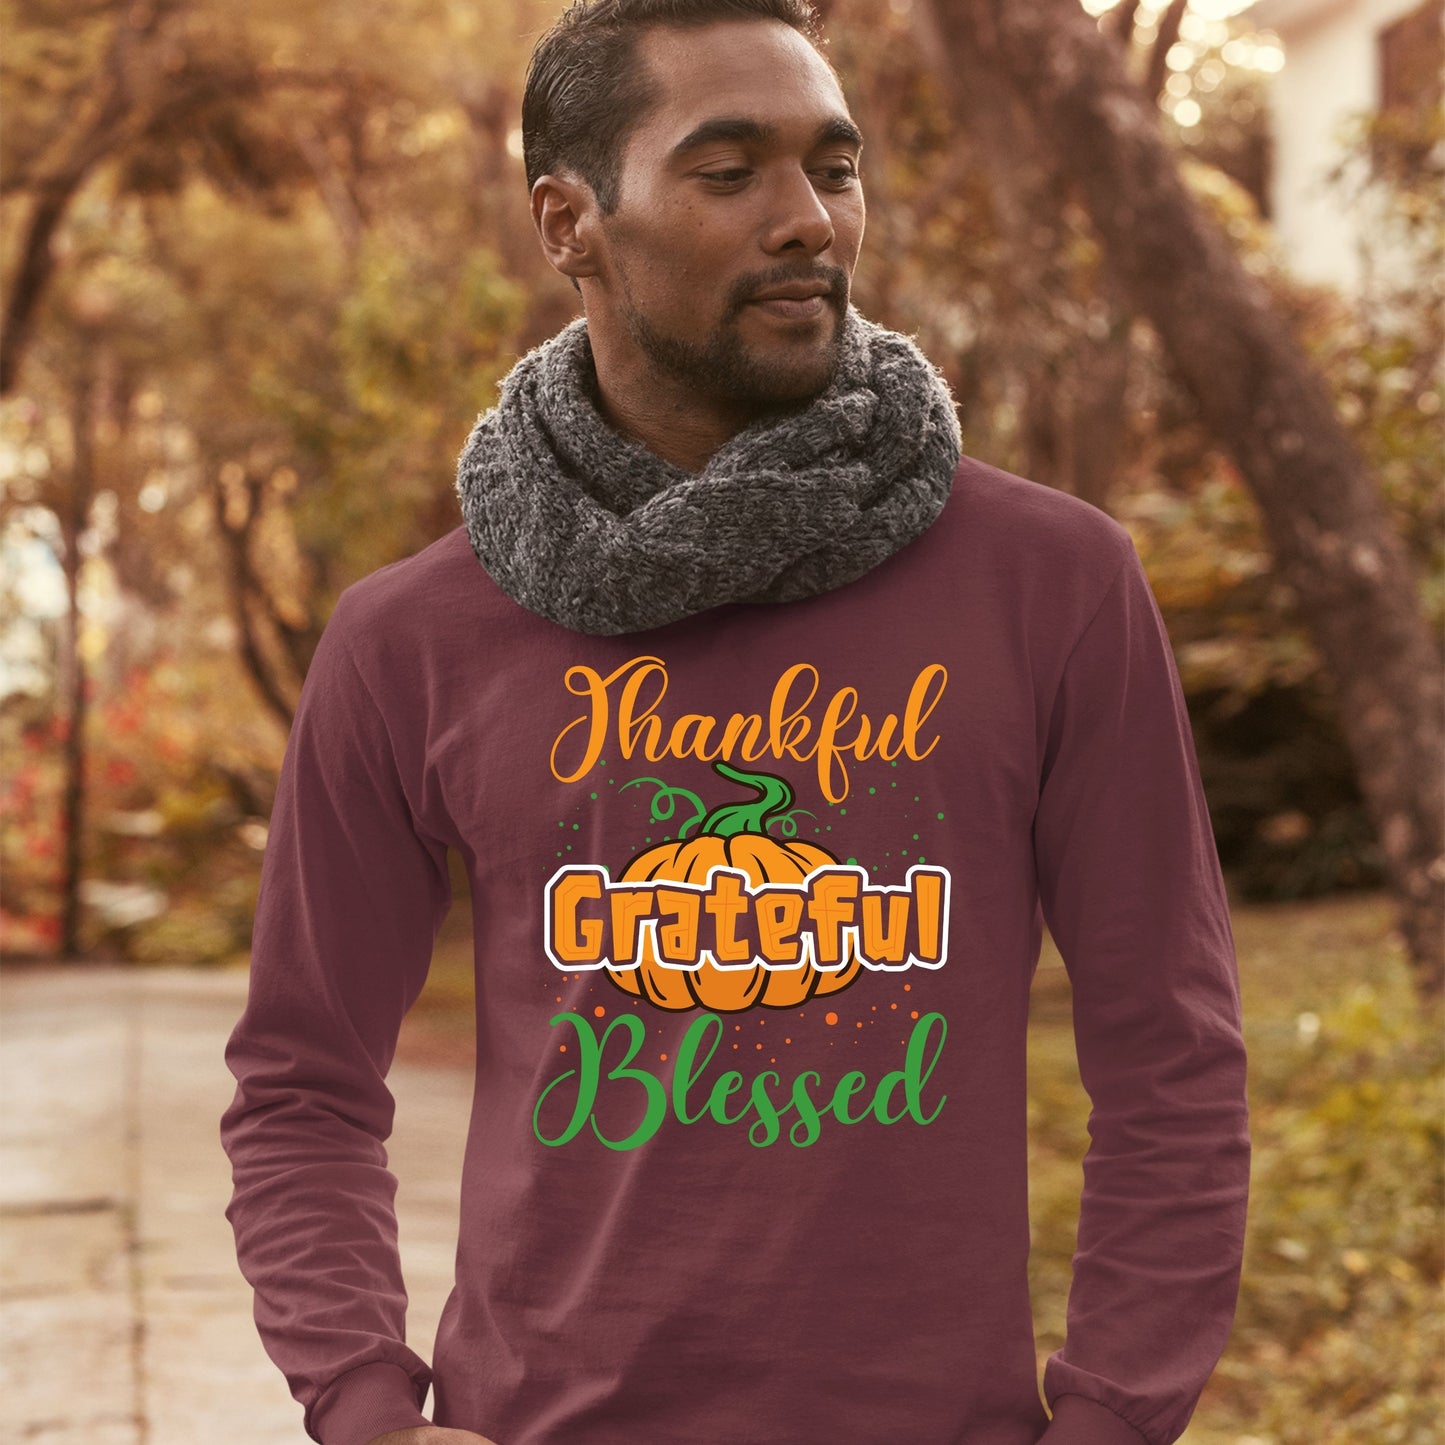 Thankful Grateful Blessed, Thanksgiving Sweatshirt, Thanksgiving Sweater for Men, Thanksgiving Gift Ideas, Cute Thanksgiving